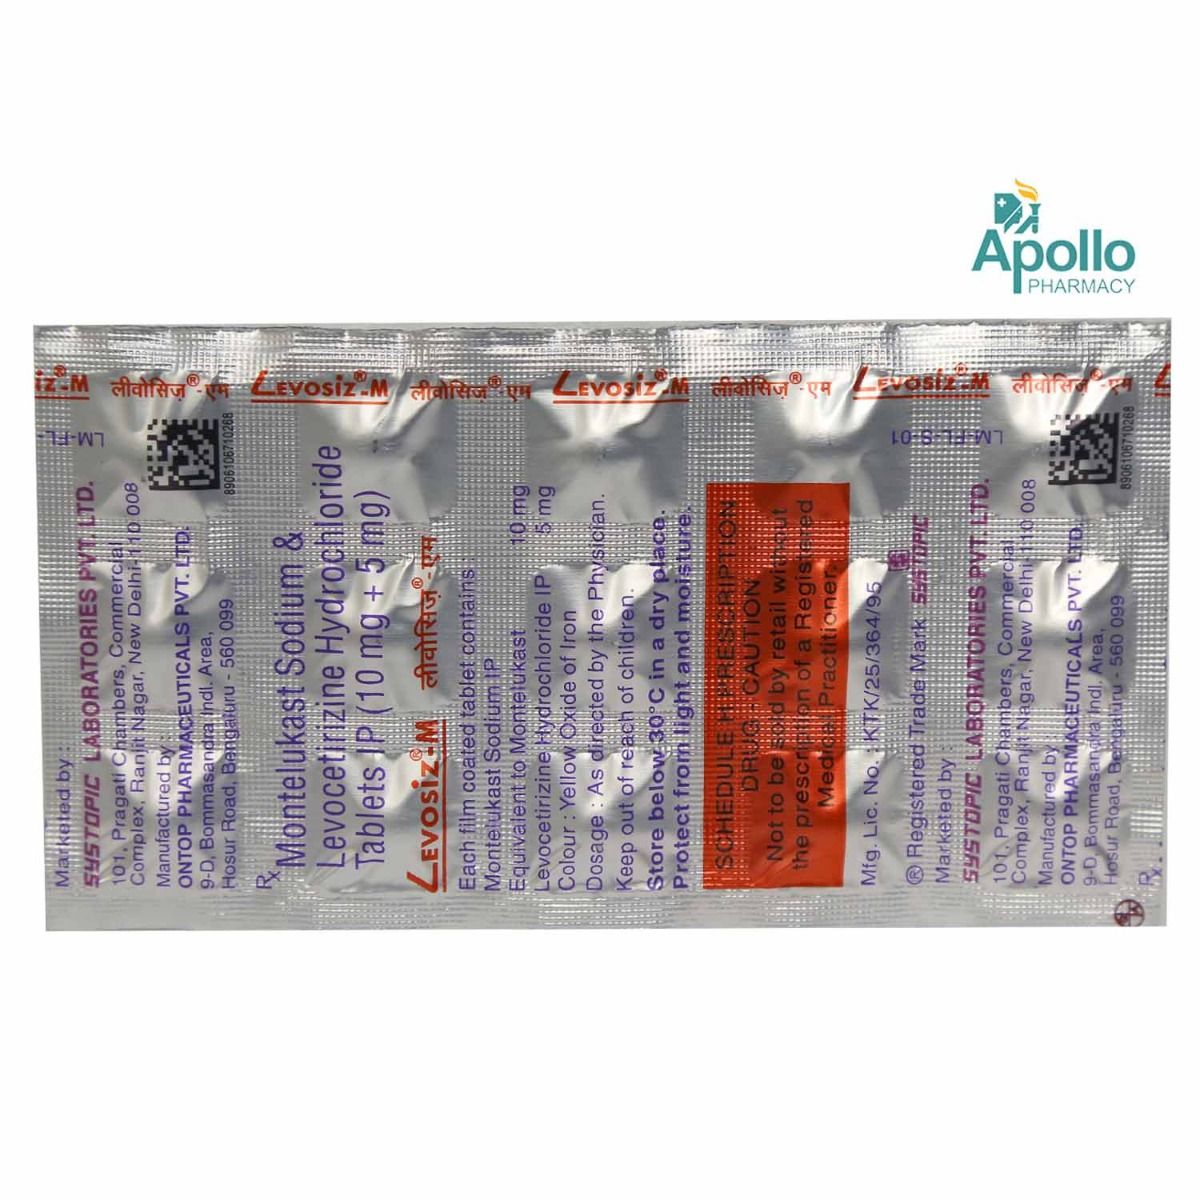 Levosiz M Tablet 15's Price, Uses, Side Effects, Composition - Apollo